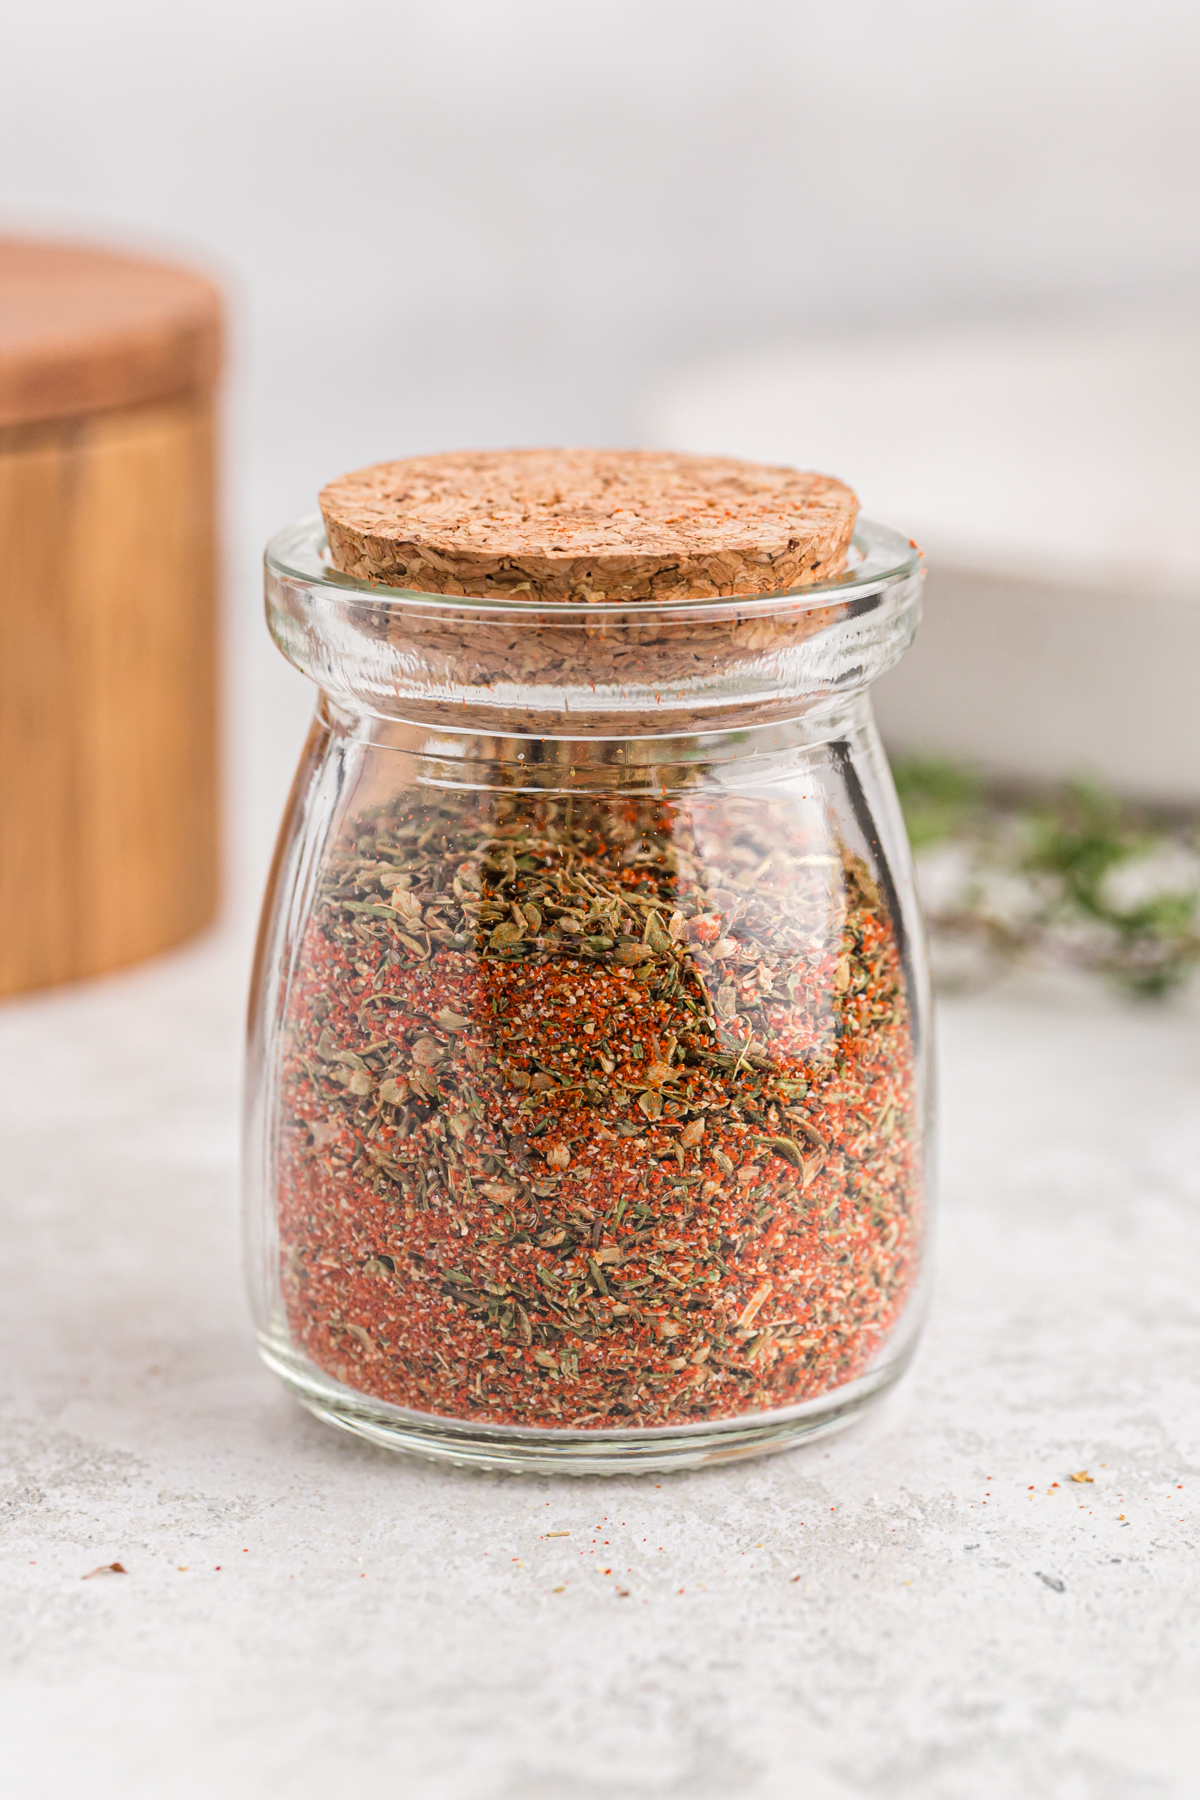 Blackened spice in an air tight glass container